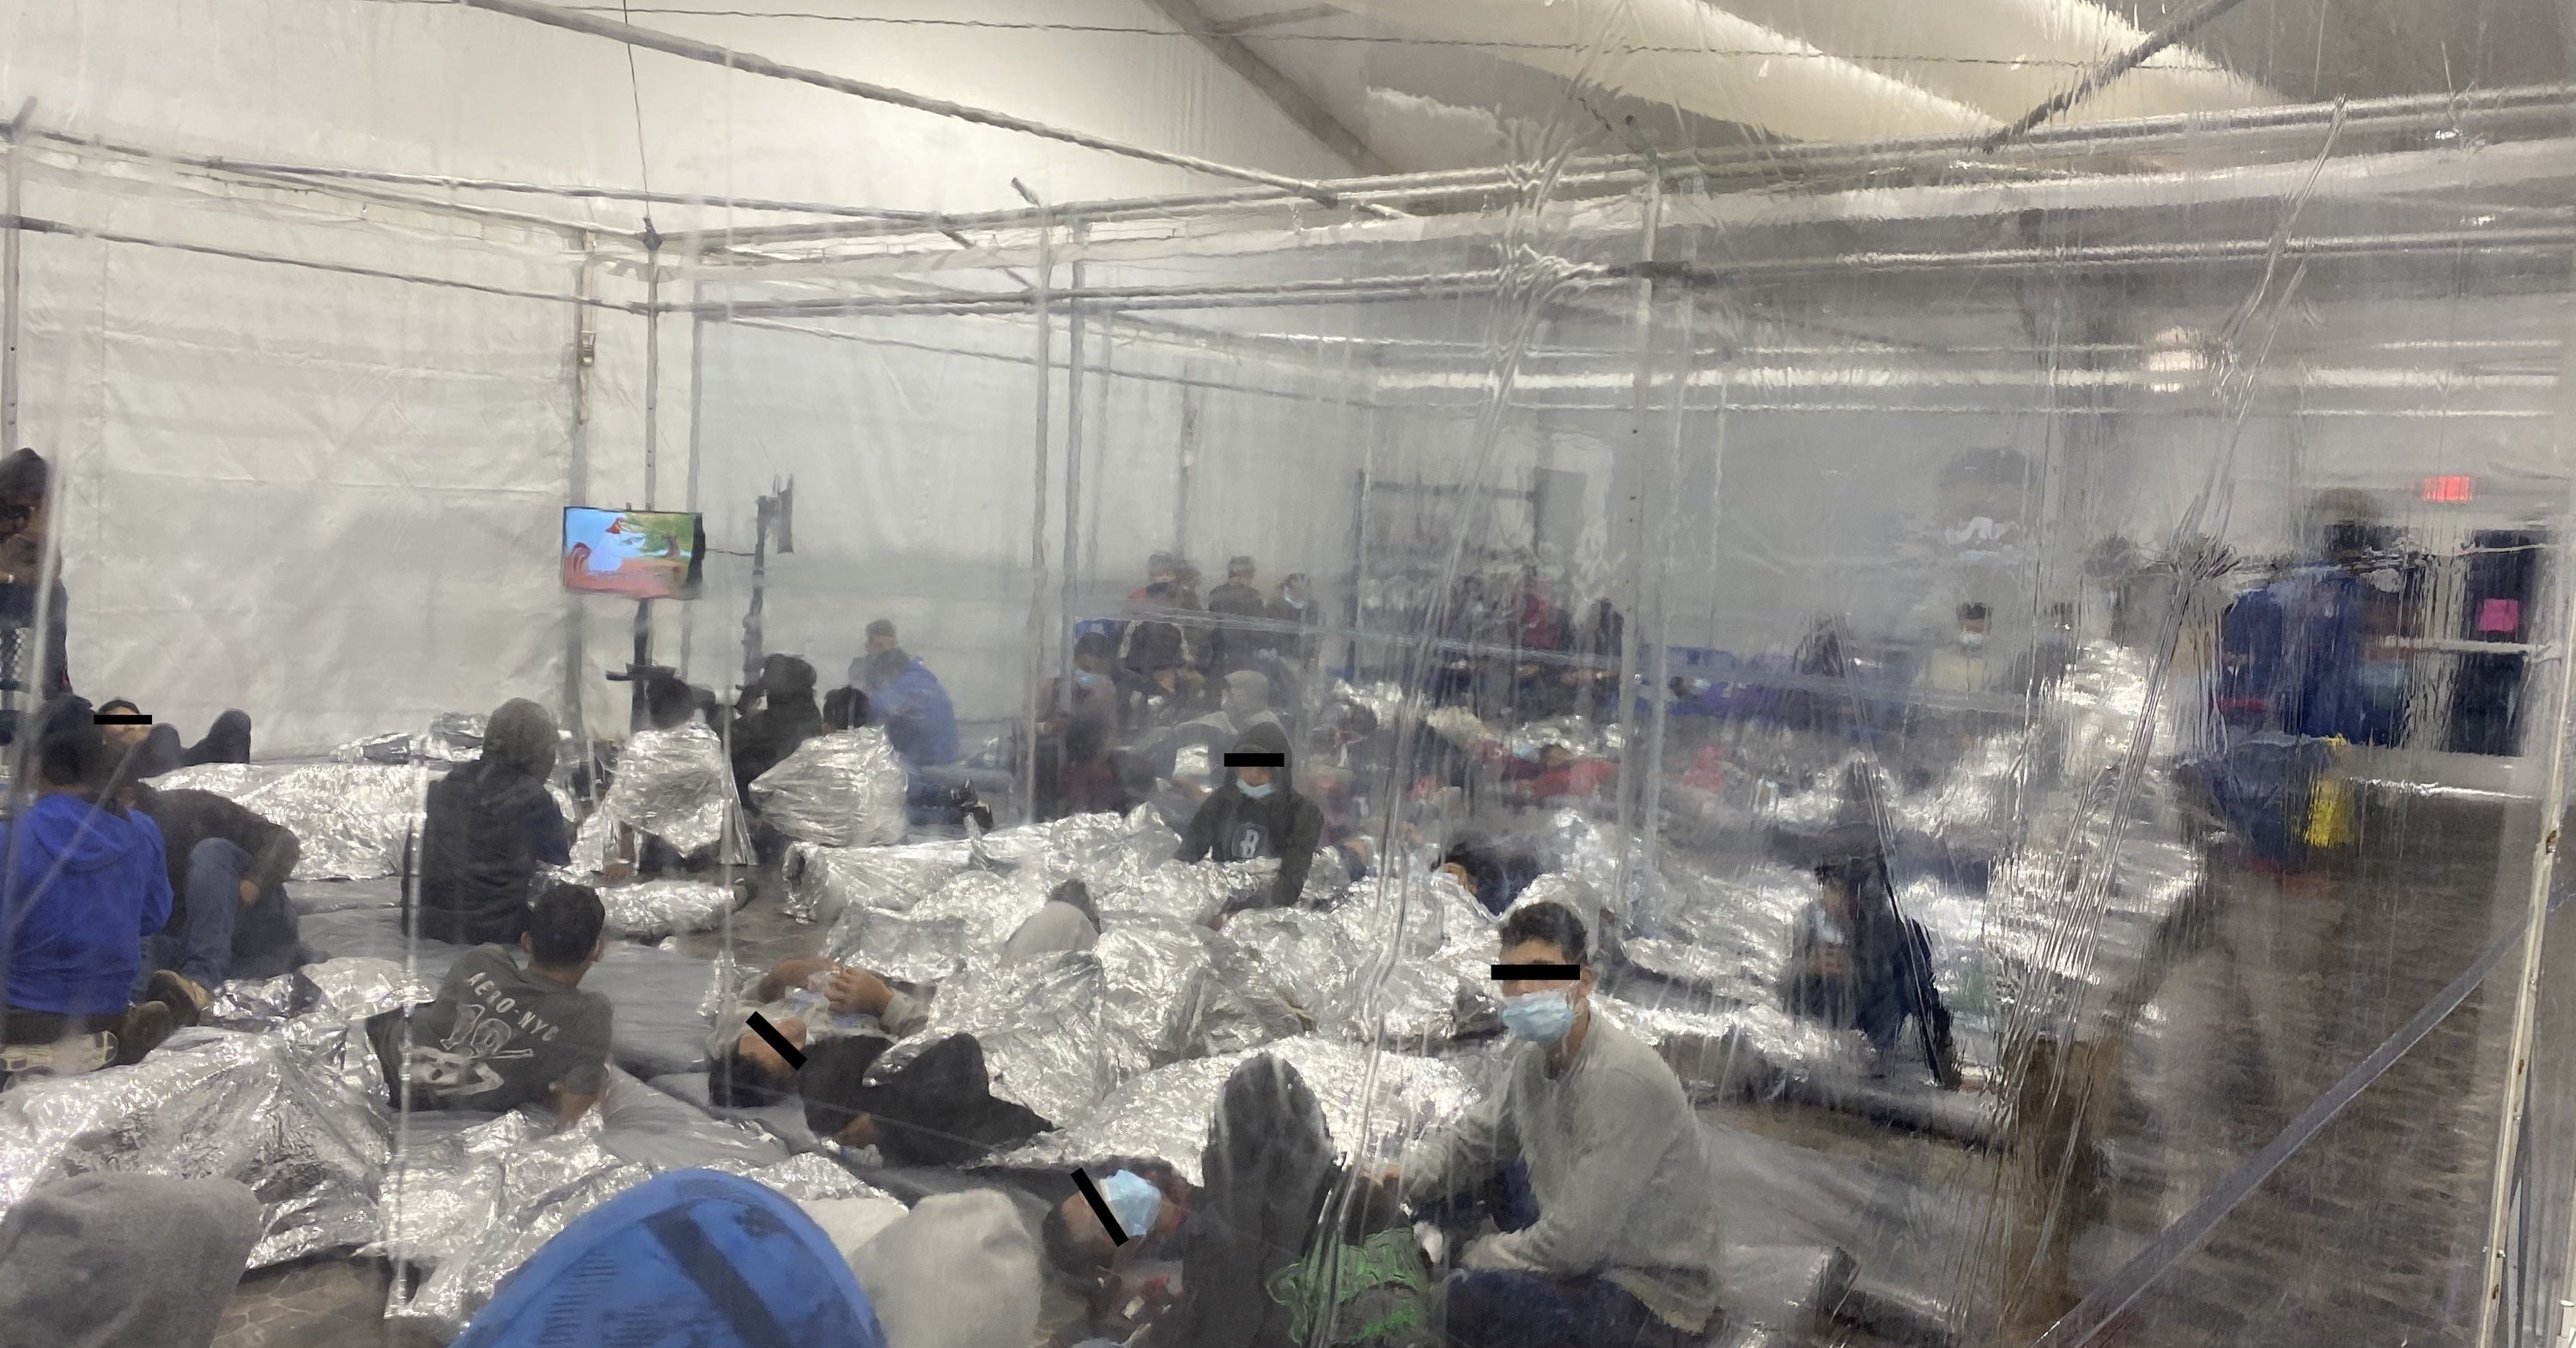 New photos show overcrowded camps for minors at the border